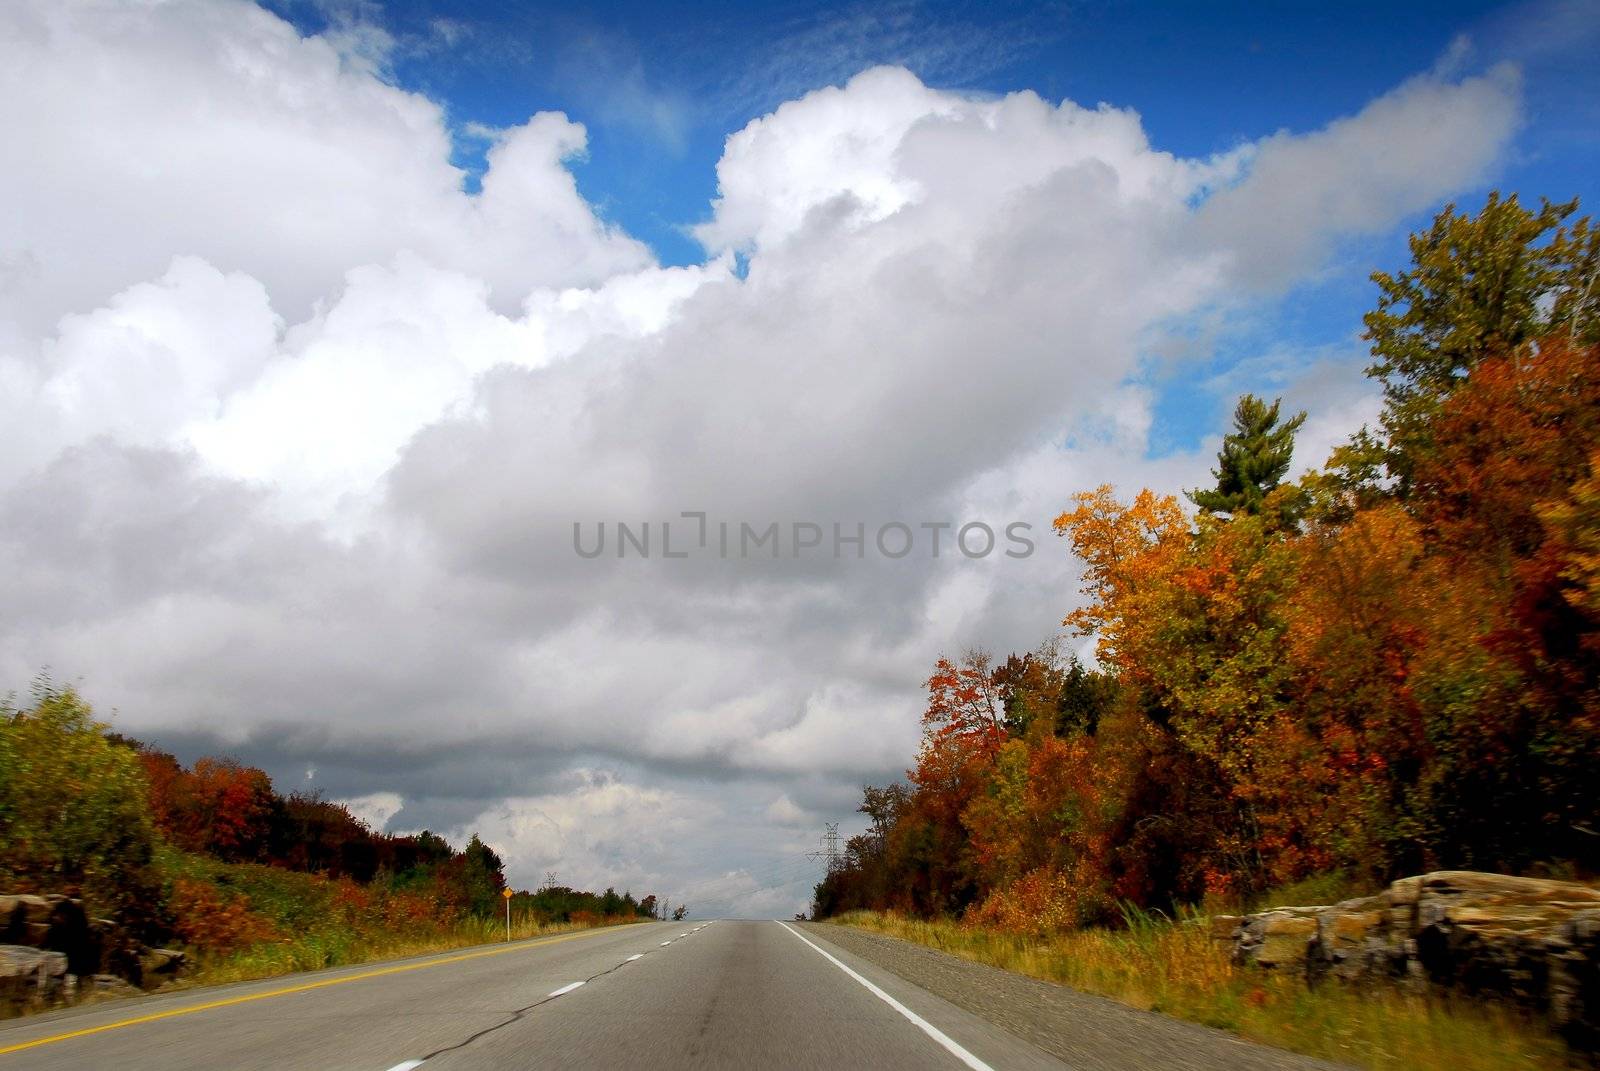 Divided highway in the fall, some motion blur on the sides